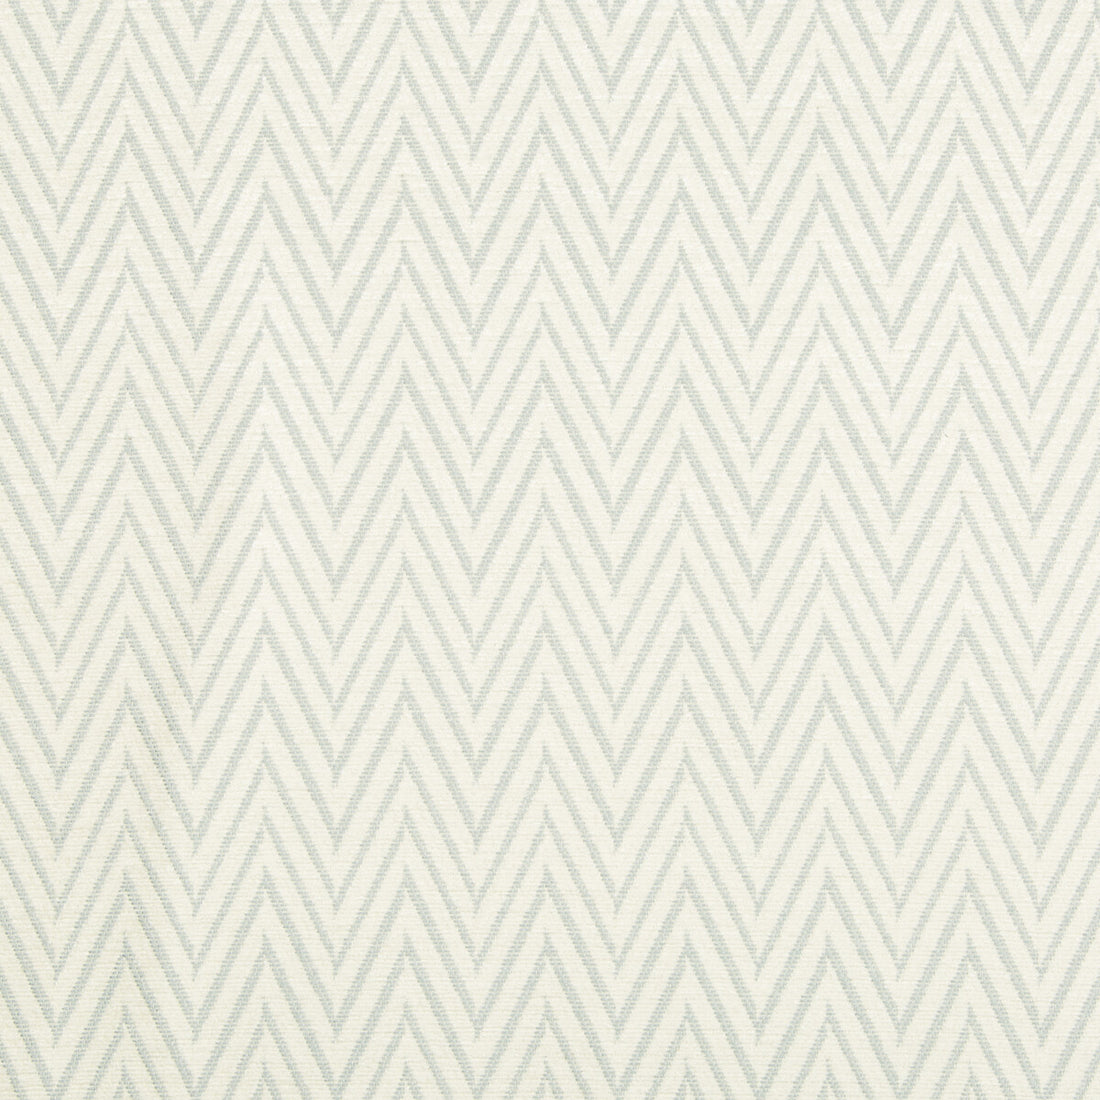 Kravet Design fabric in 34690-15 color - pattern 34690.15.0 - by Kravet Design in the Crypton Home collection